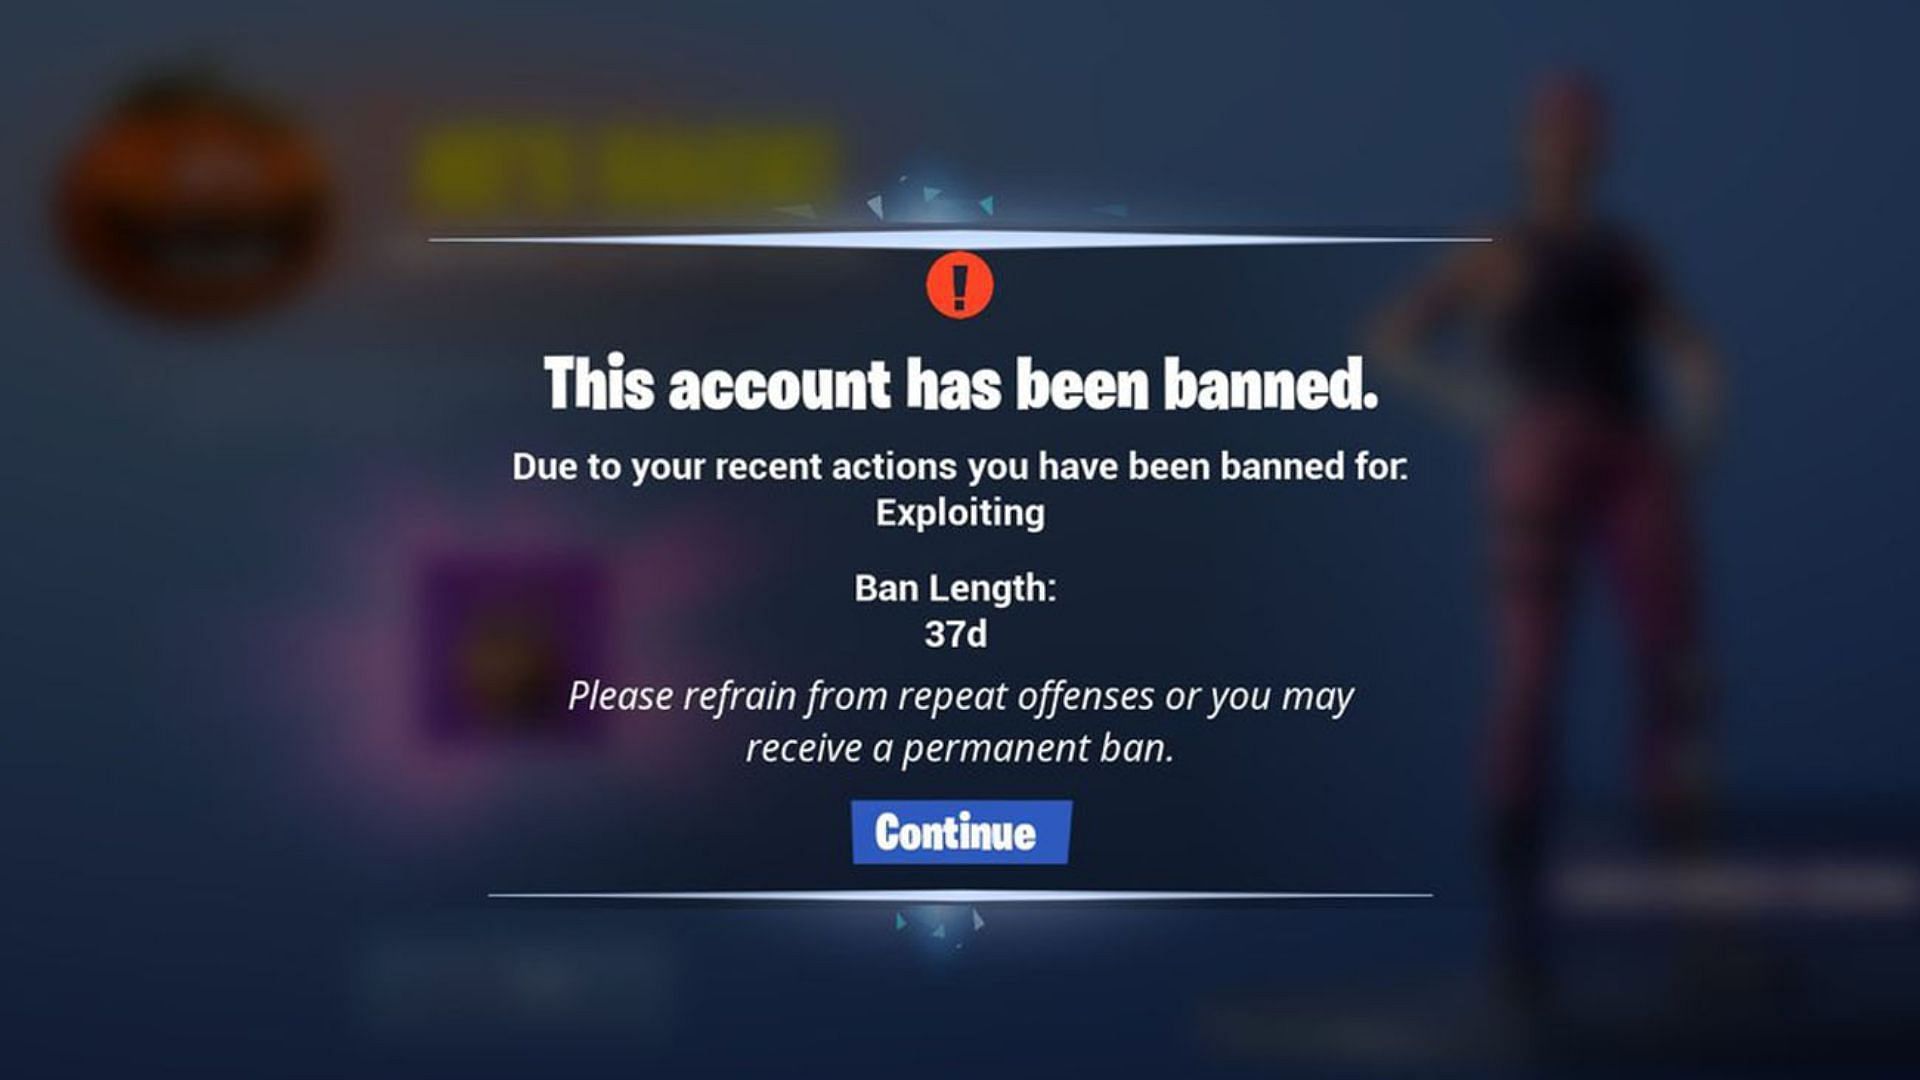 Latest Fortnite ban wave banned thousands of players for no reason